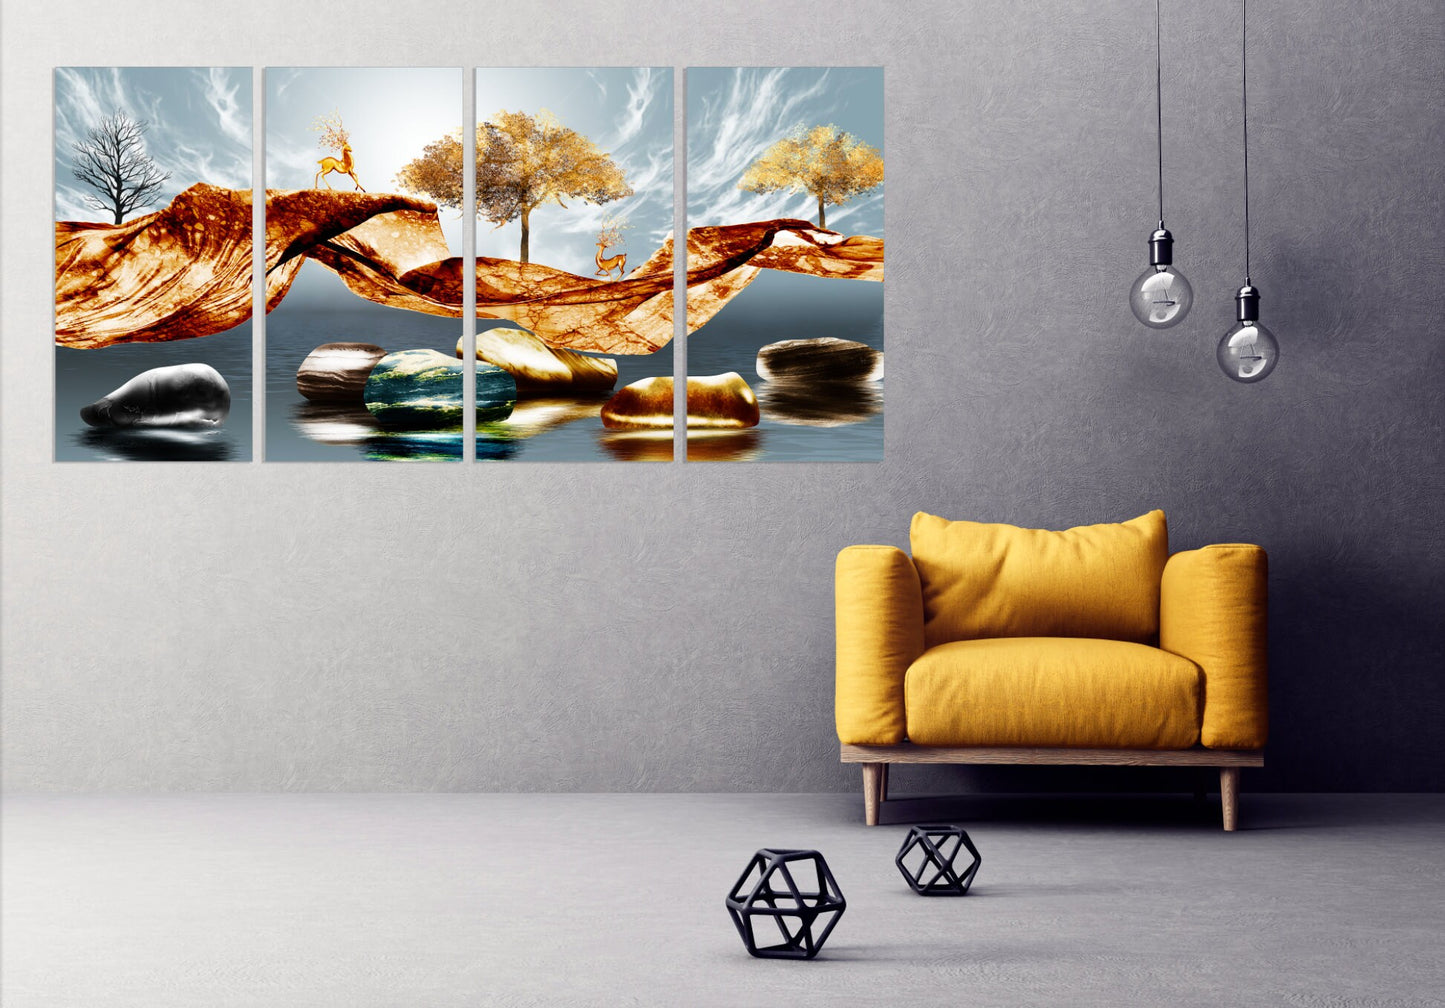 Forest animals figurines Fruit trees live plant Golden deer Canvas painting Home wall decor Infinity stones 3 piece frame canvas